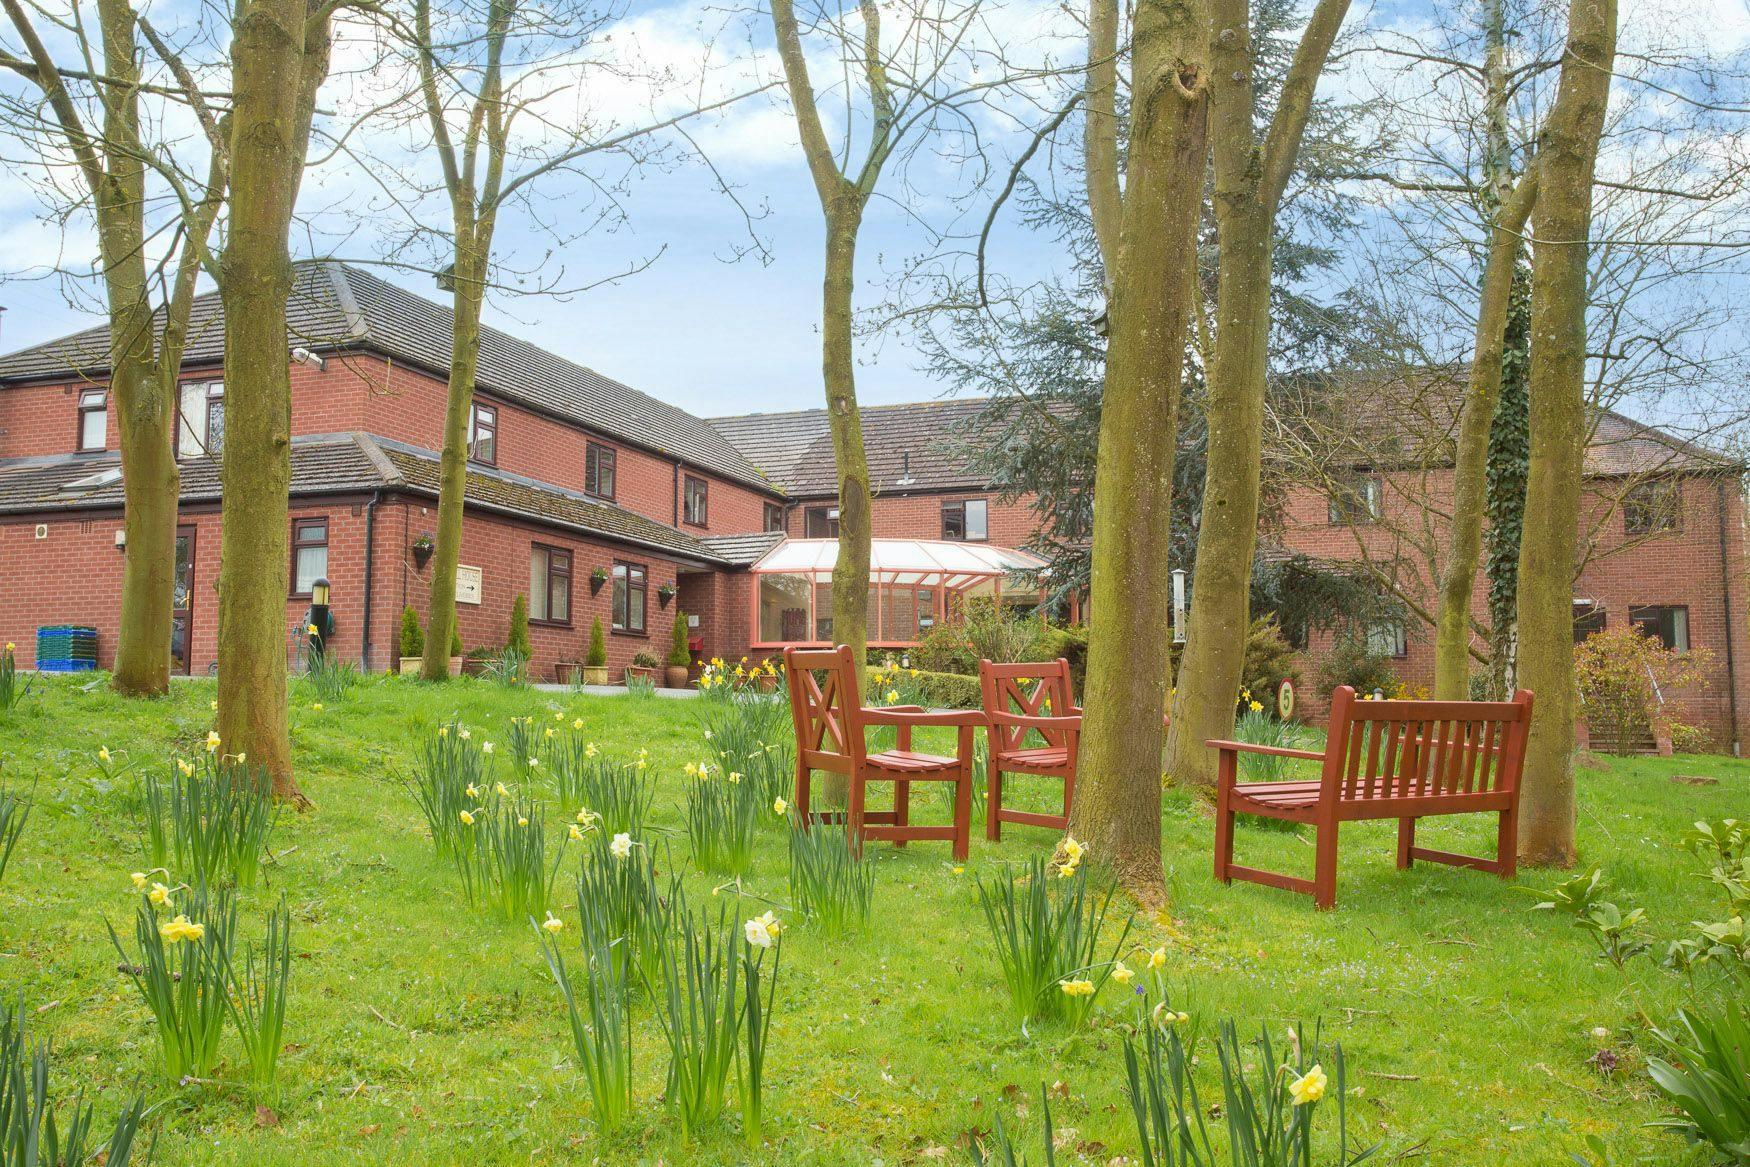 The Mill House Care Home